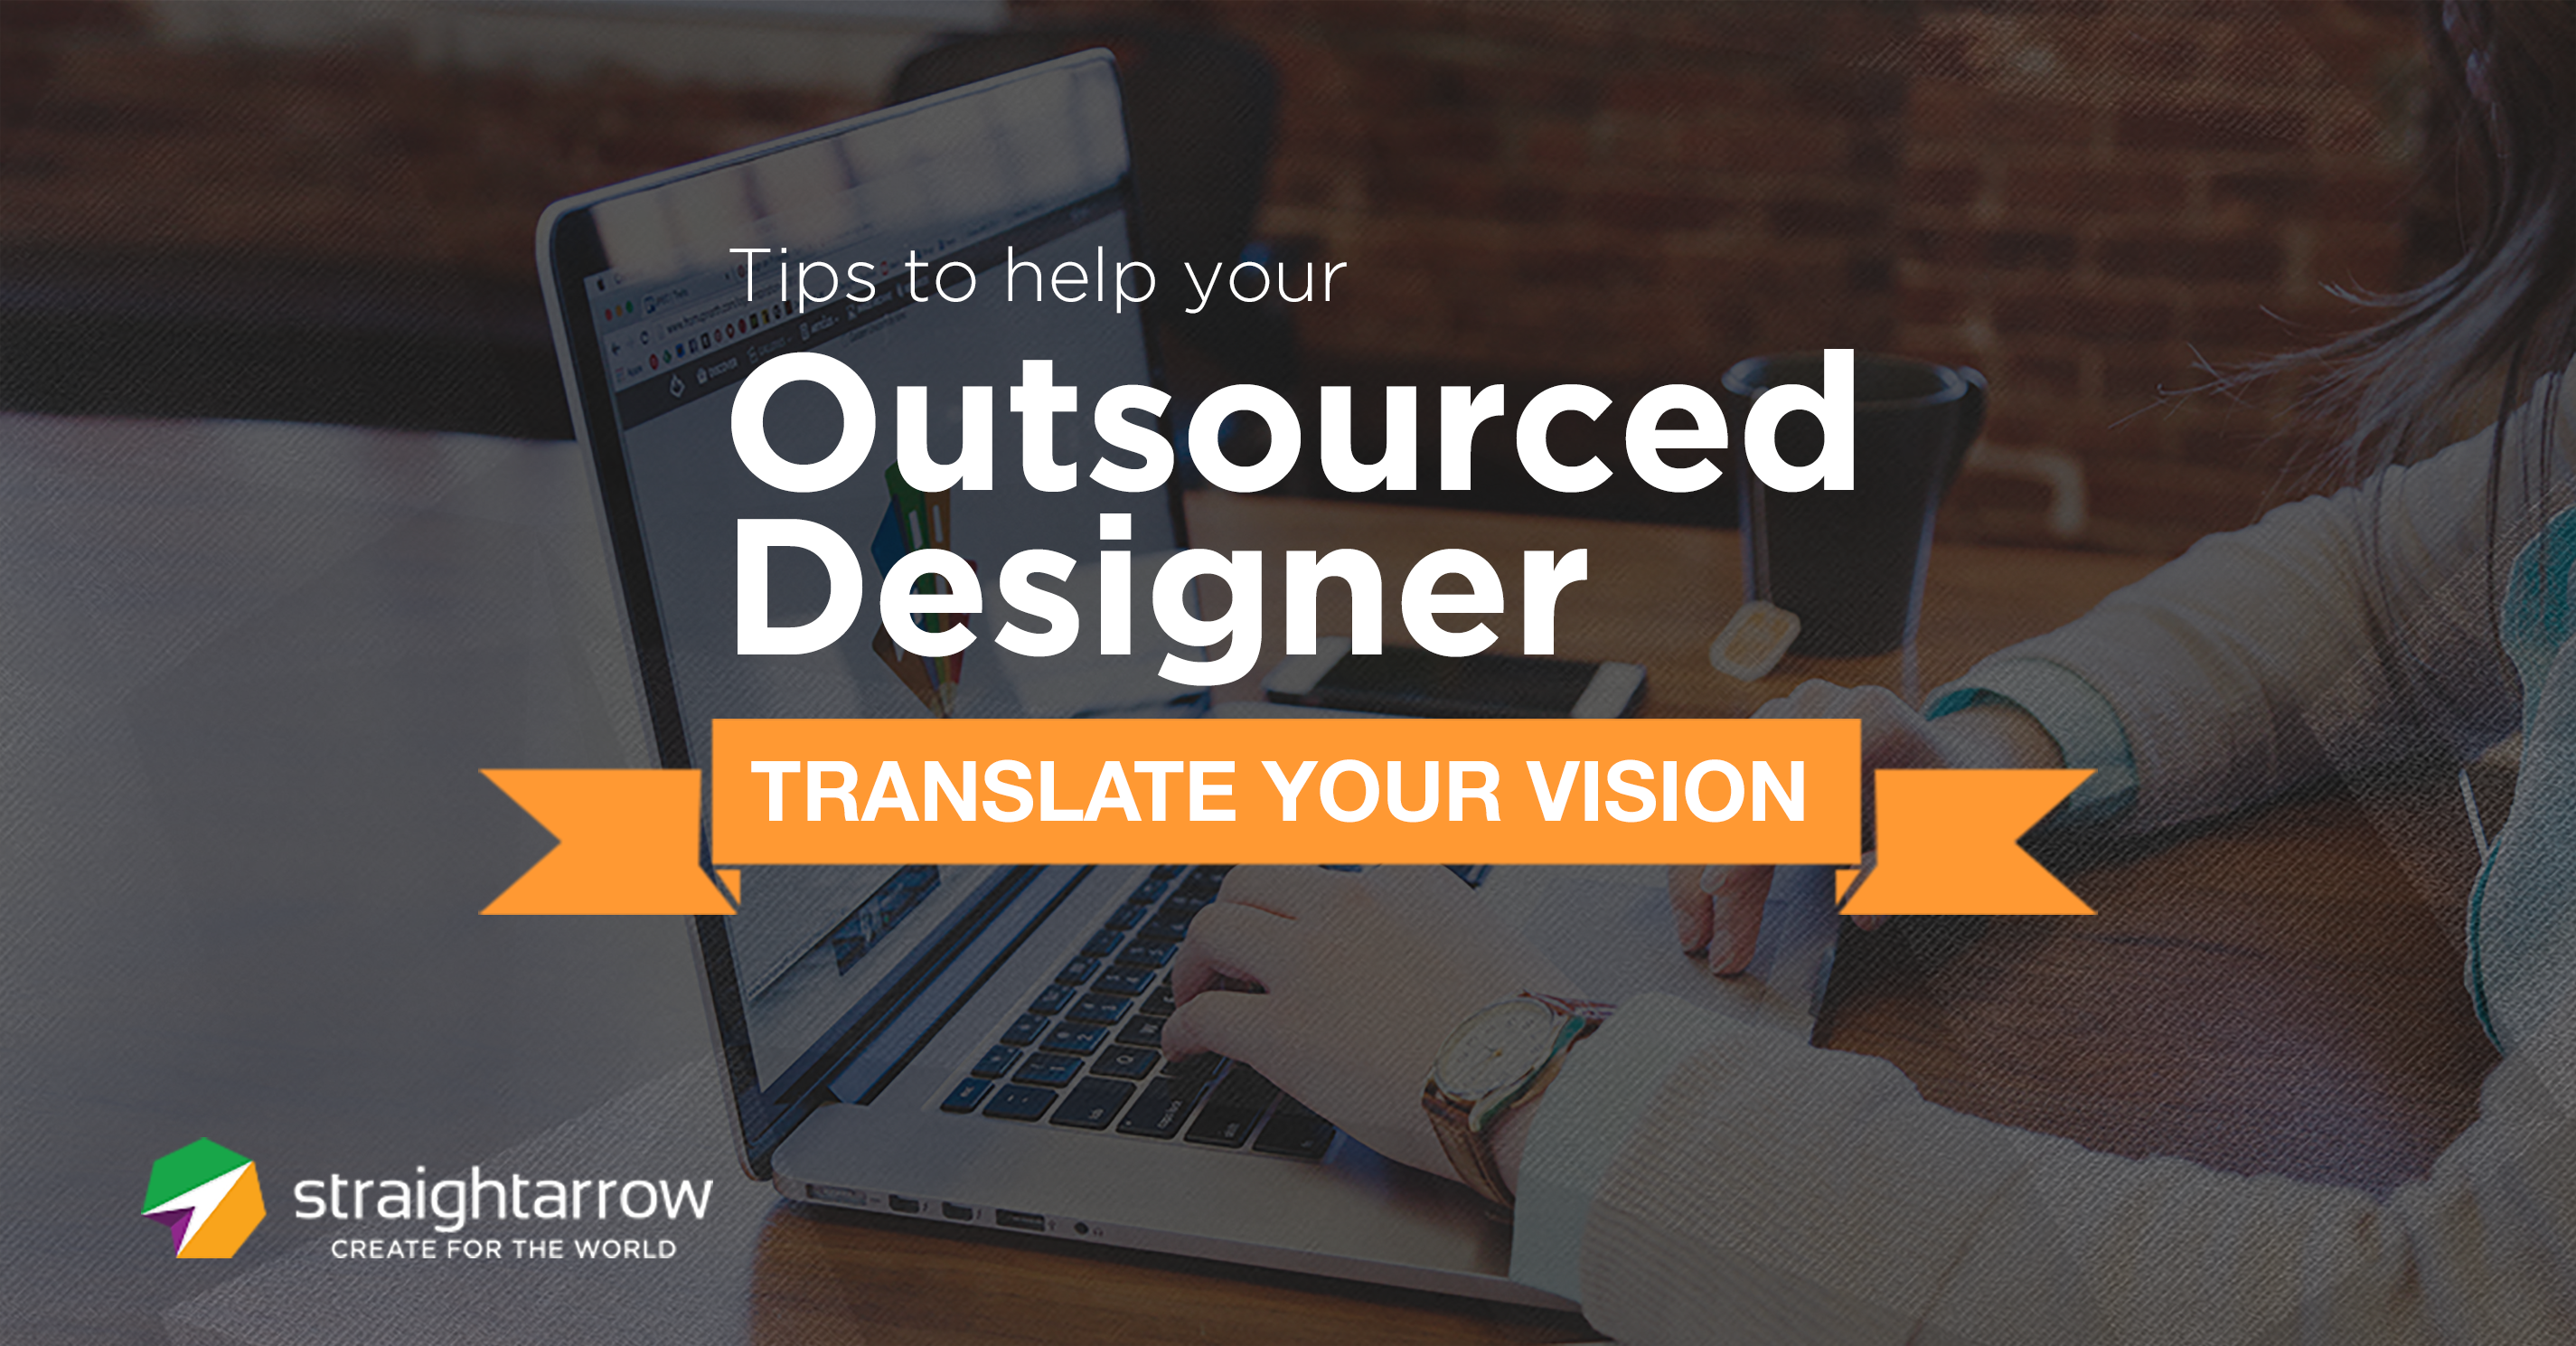 Tips to help your outsourced designer translate your vision